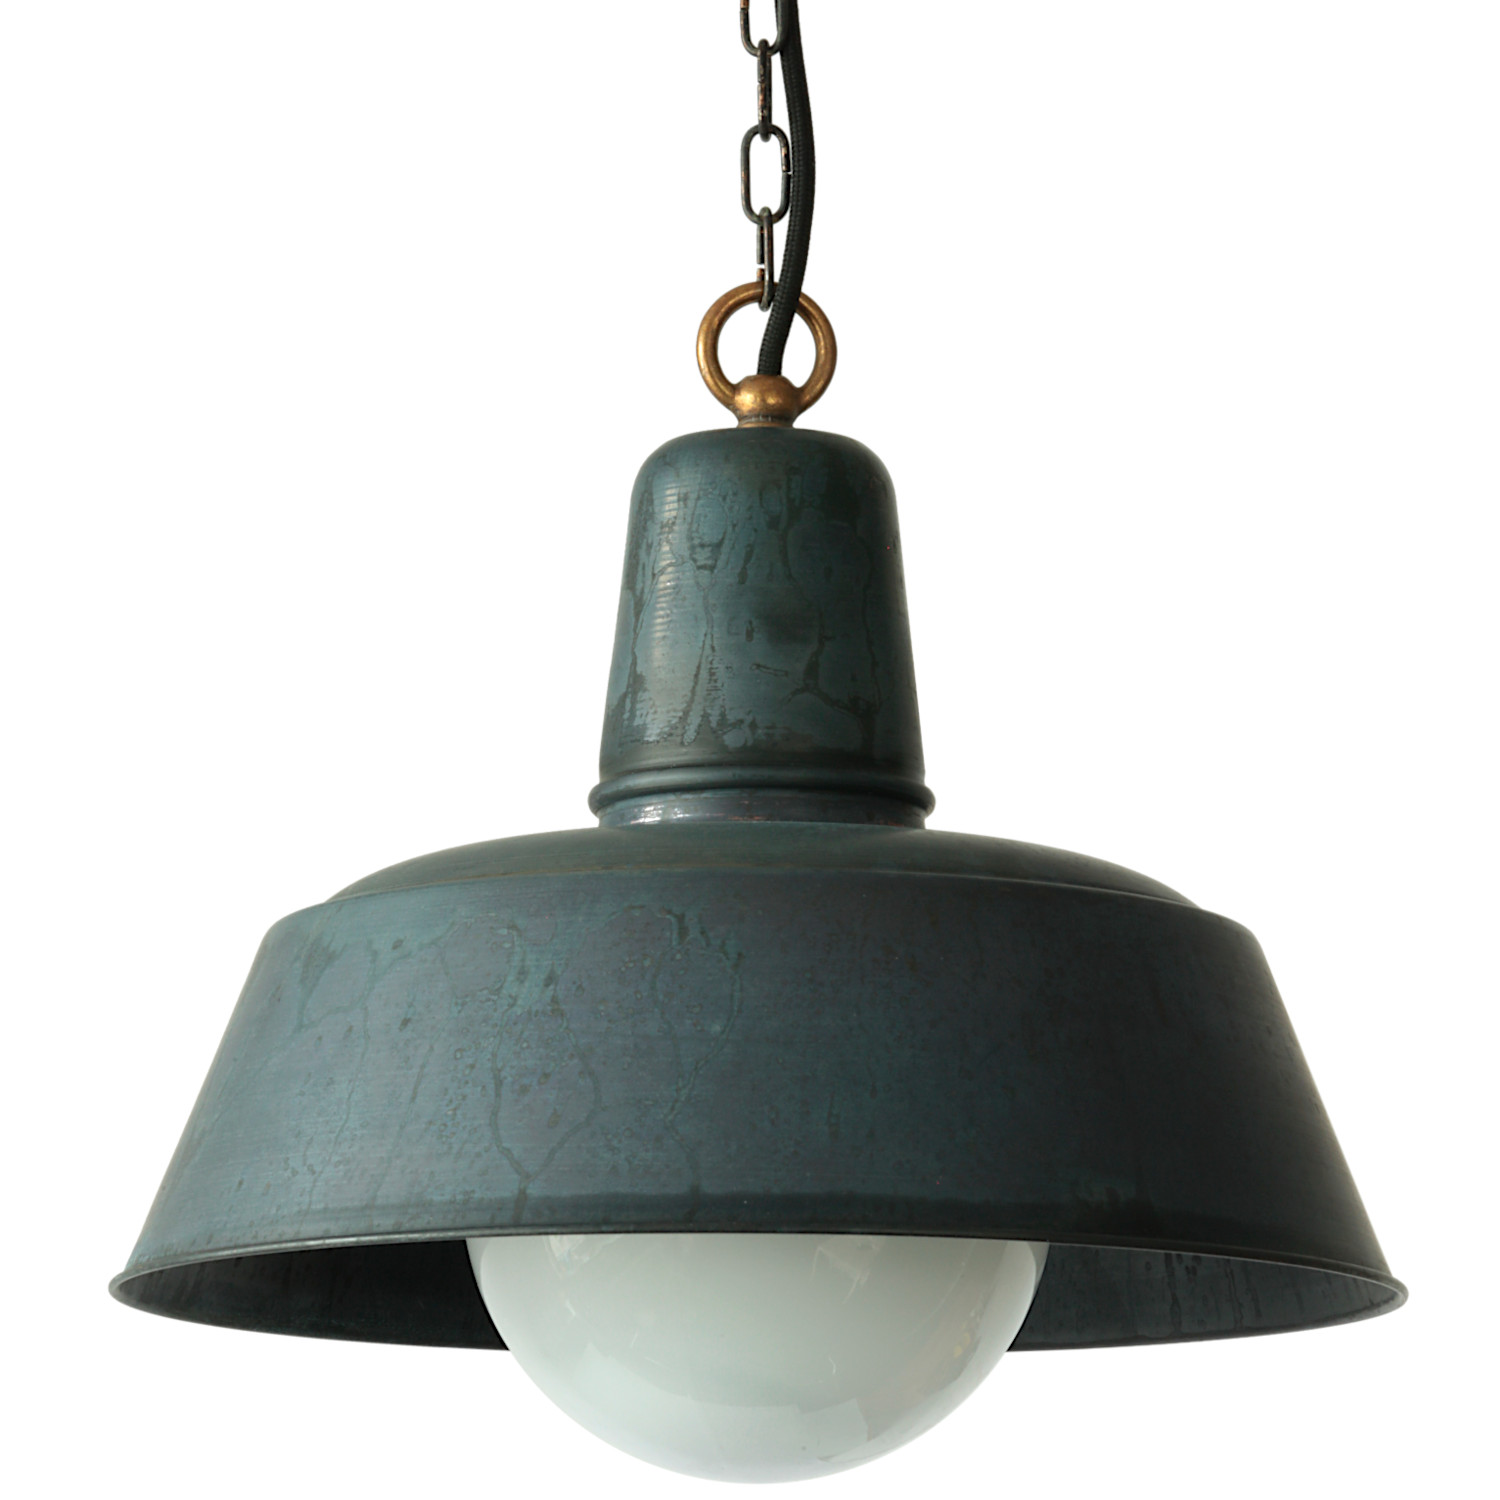 Classic Industrial Copper Pendant Light Berlin With Glass